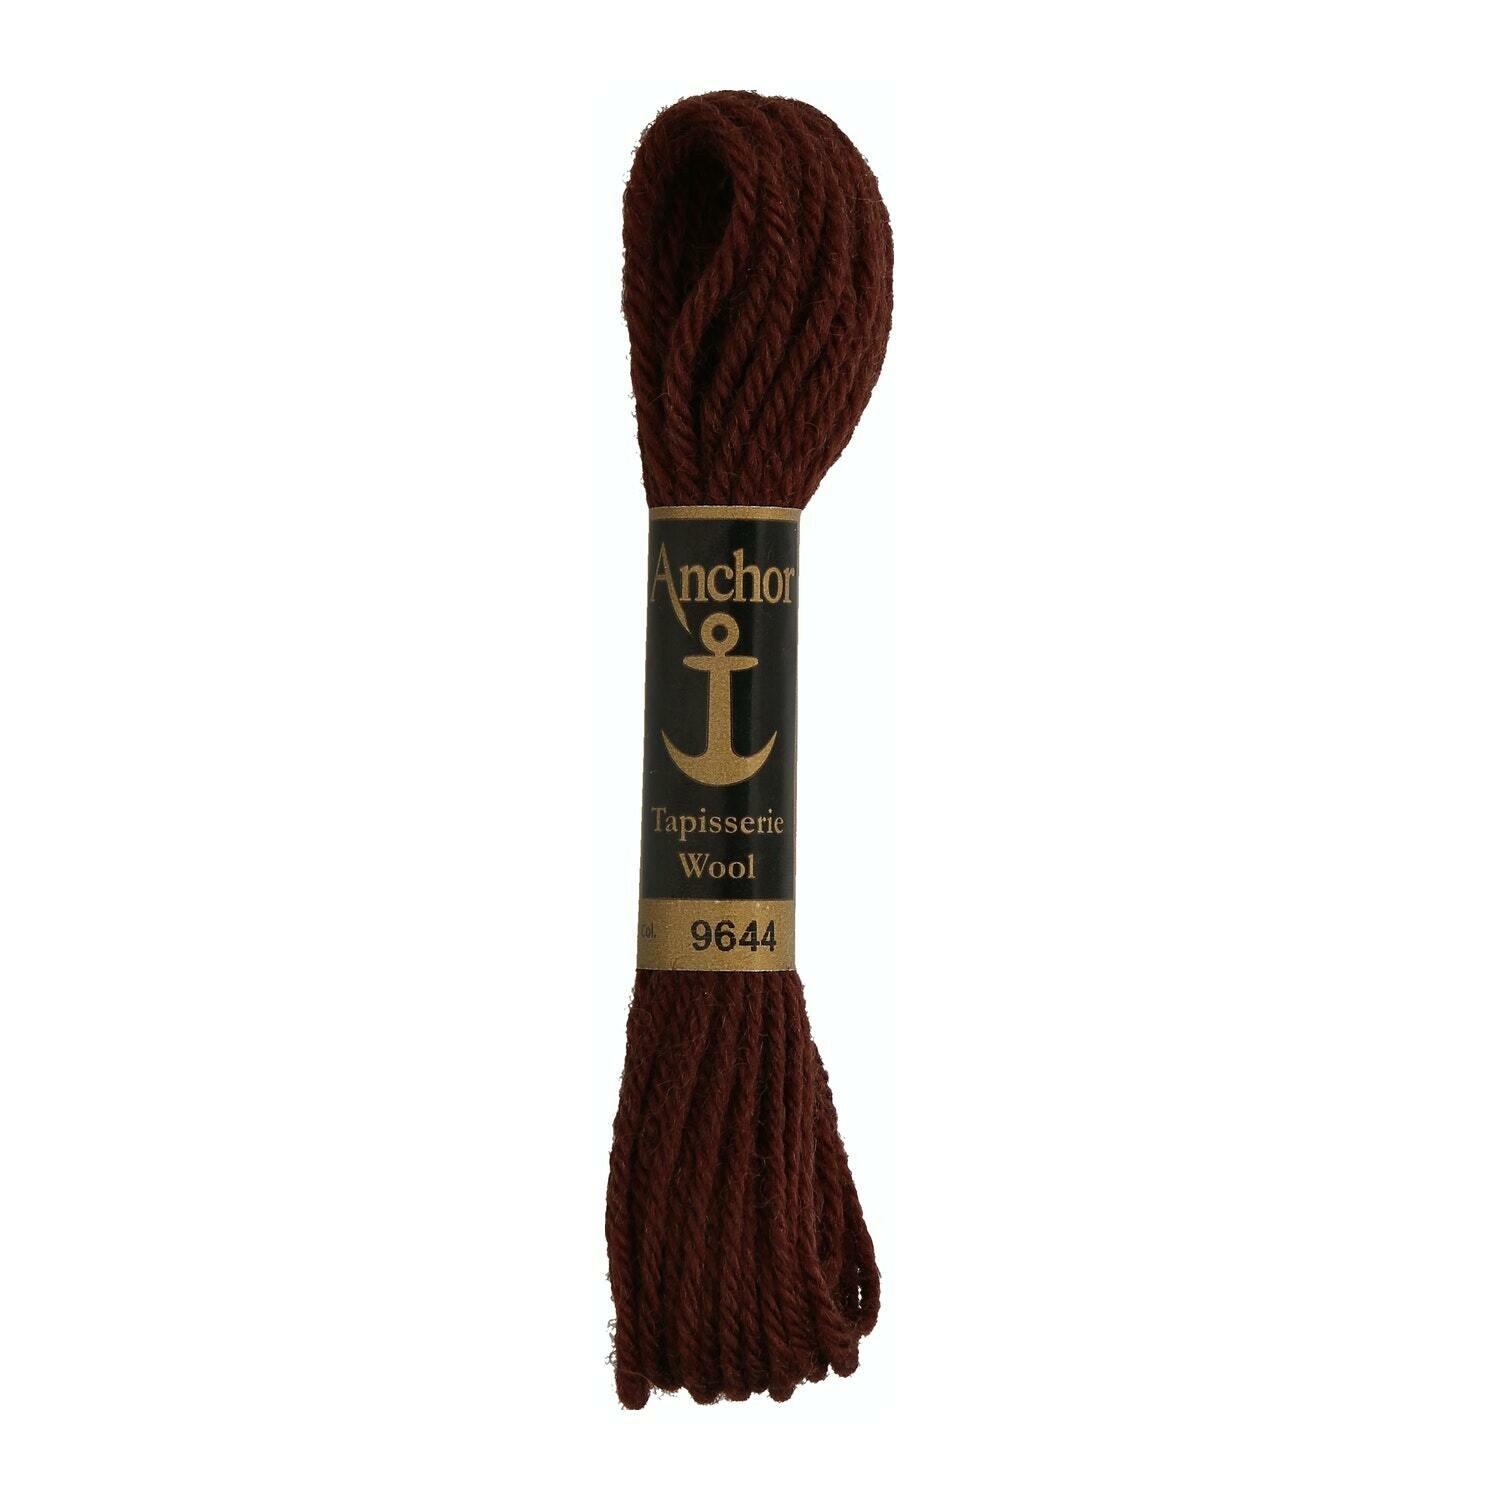 Anchor Tapisserie Wool # 09644